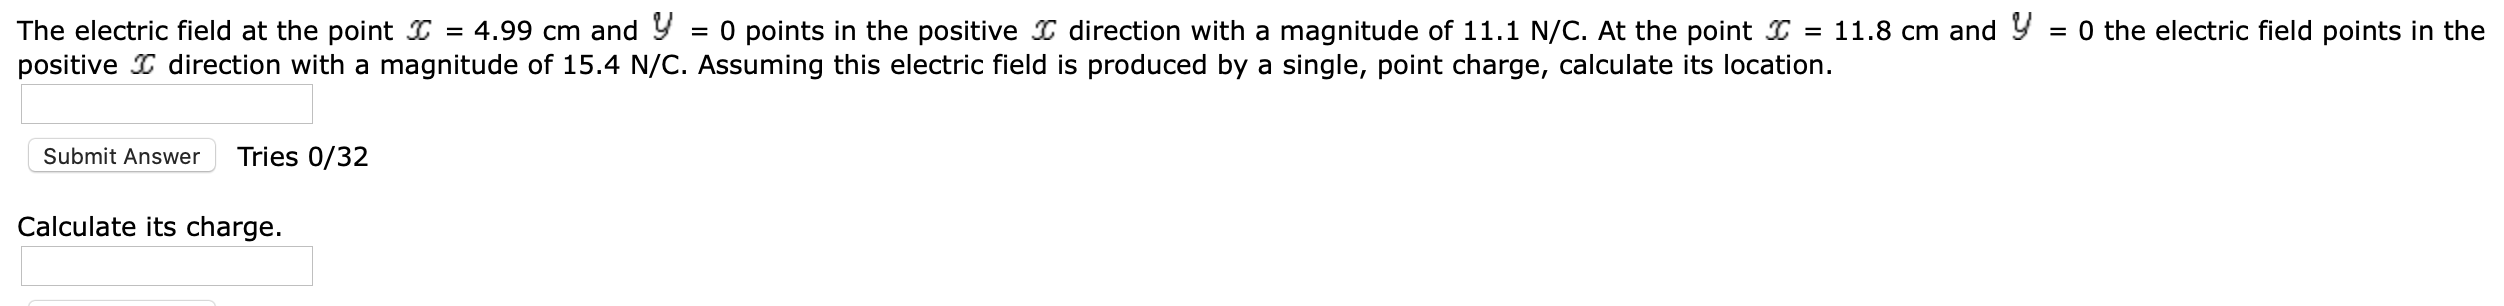 = 0 points in the positive I direction with a magnitude of 11.1 N/C. At the point I = 11.8 cm and Y = 0 the electric field points in the
The electric field at the point I = 4.99 cm and Y
positive I direction with a magnitude of 15.4 N/C. Assuming this electric field is produced by a single, point charge, calculate its location.
Submit Answer
Tries 0/32
Calculate its charge.
